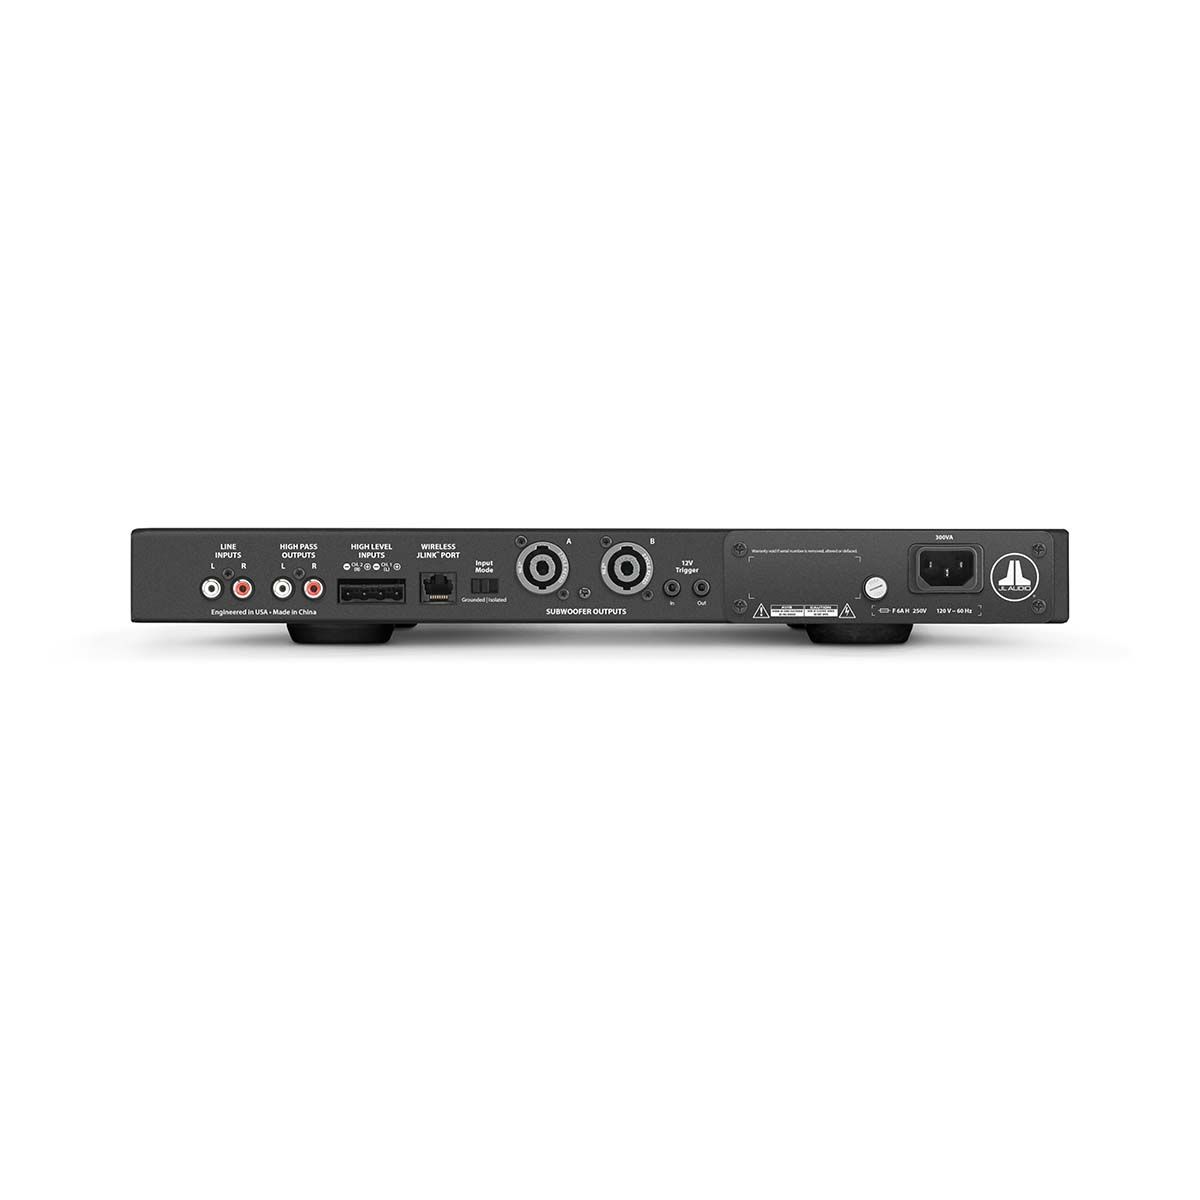 JL Audio IWS-SYS-208 In-Wall Subwoofer amplifier, rear panel view